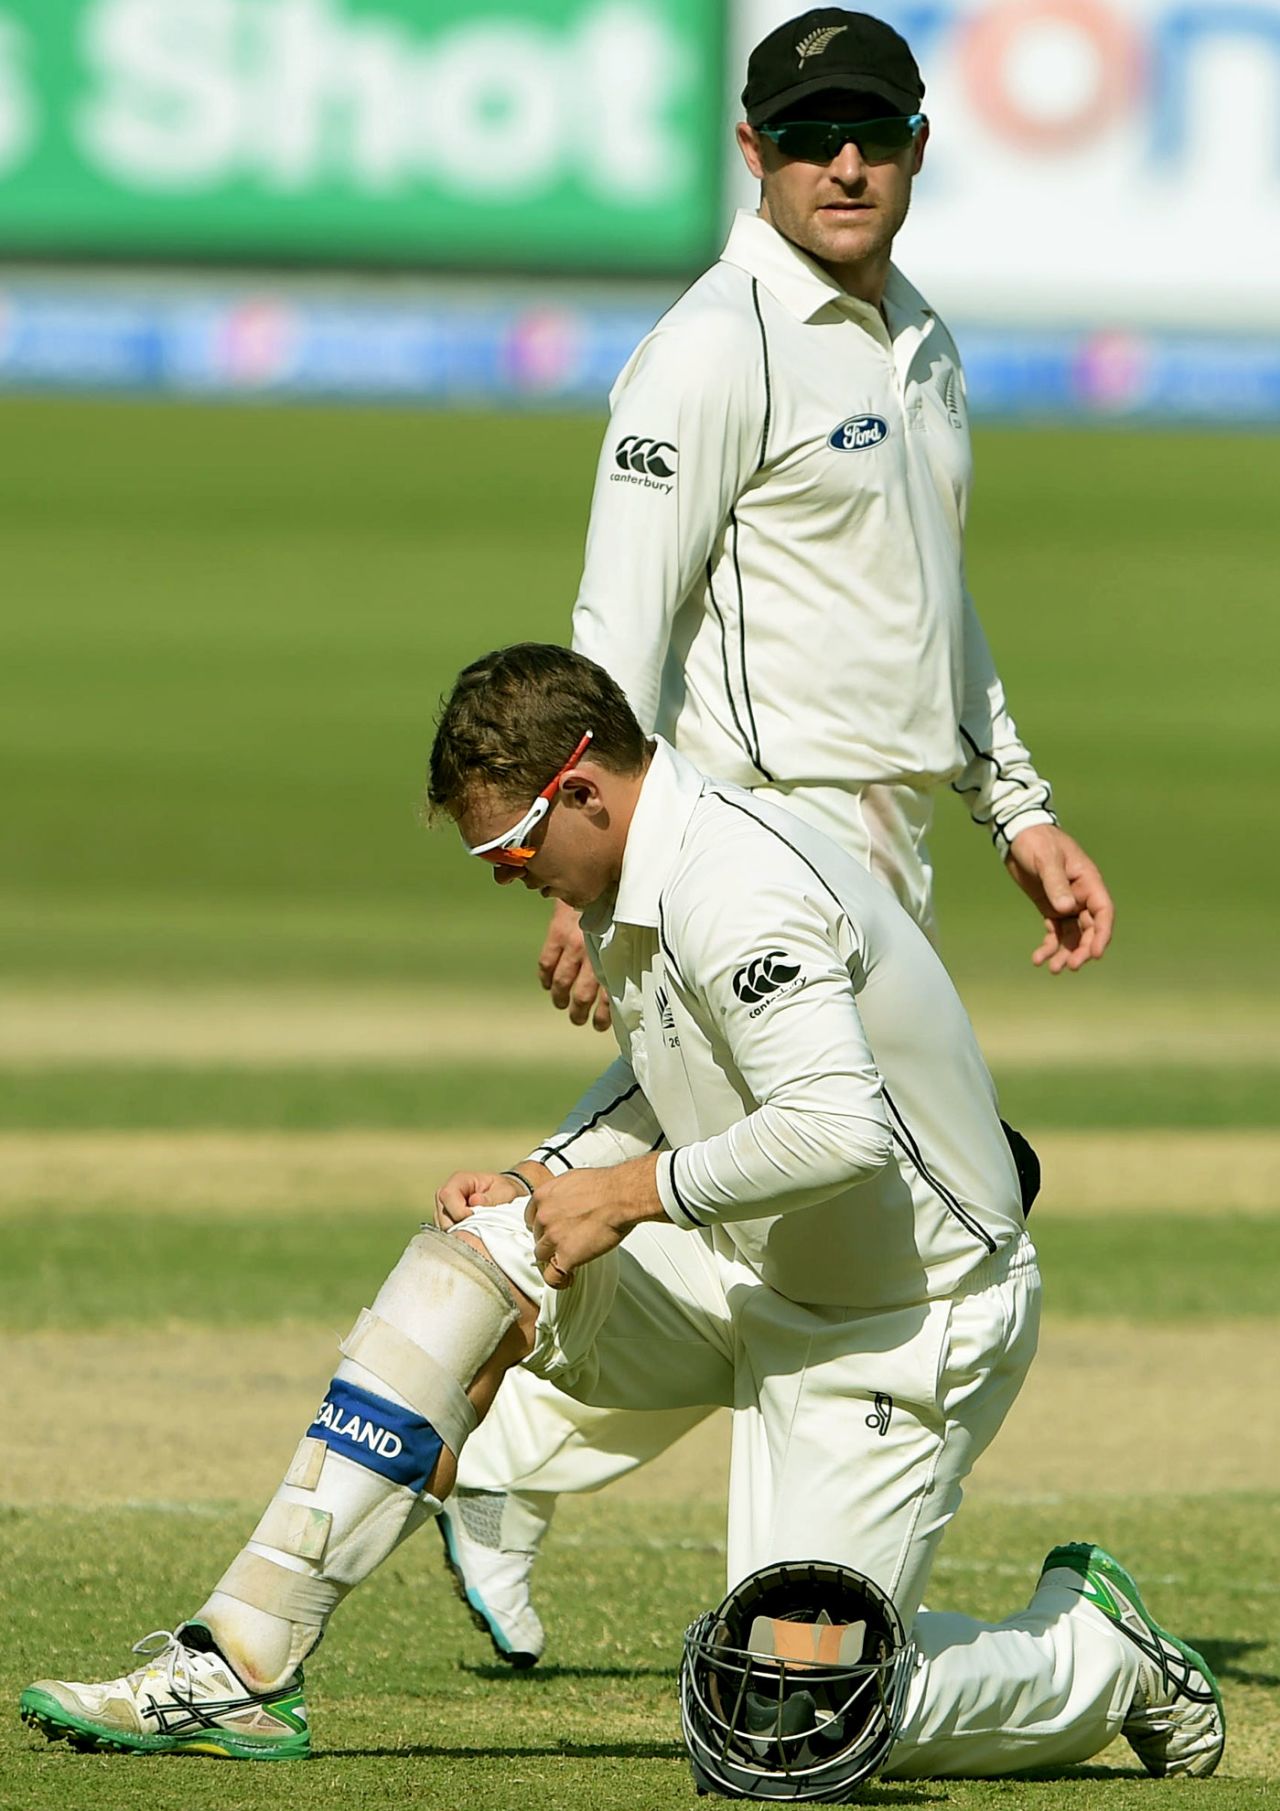 Tom Latham puts his pads on while fielding, Pakistan v New Zealand, 2nd Test, Dubai, 3rd day, November 19, 2014